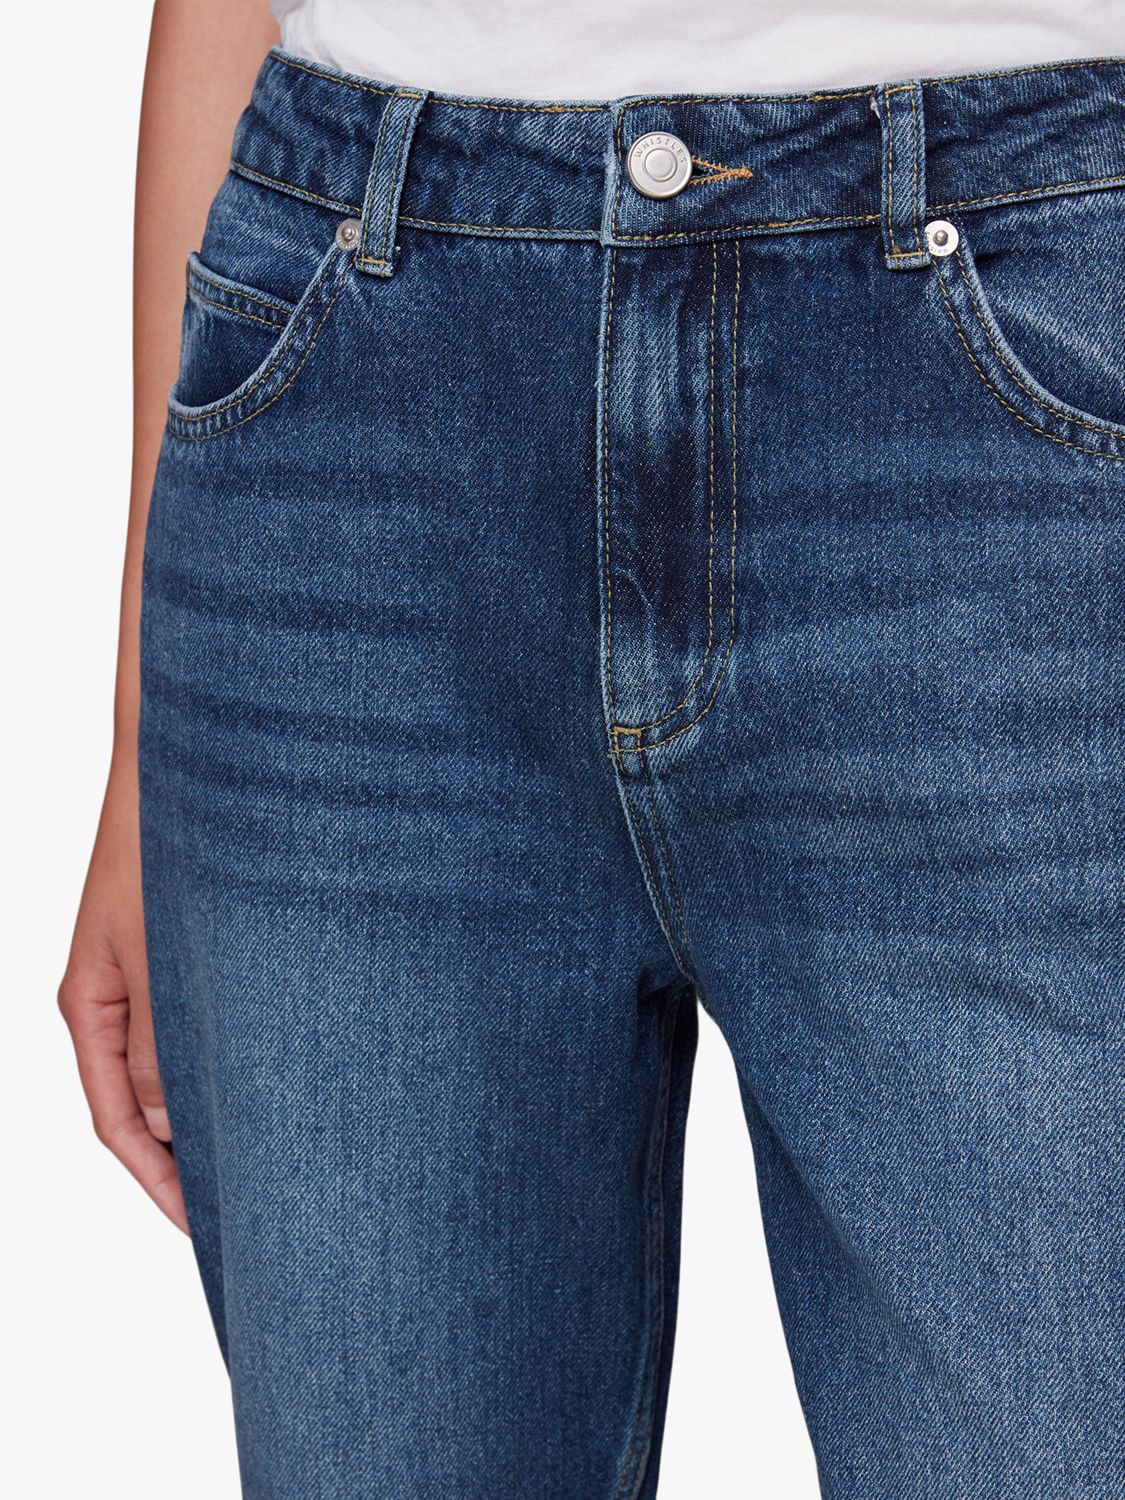 Buy Whistles Authentic Low Waist Jeans, Blue Online at johnlewis.com